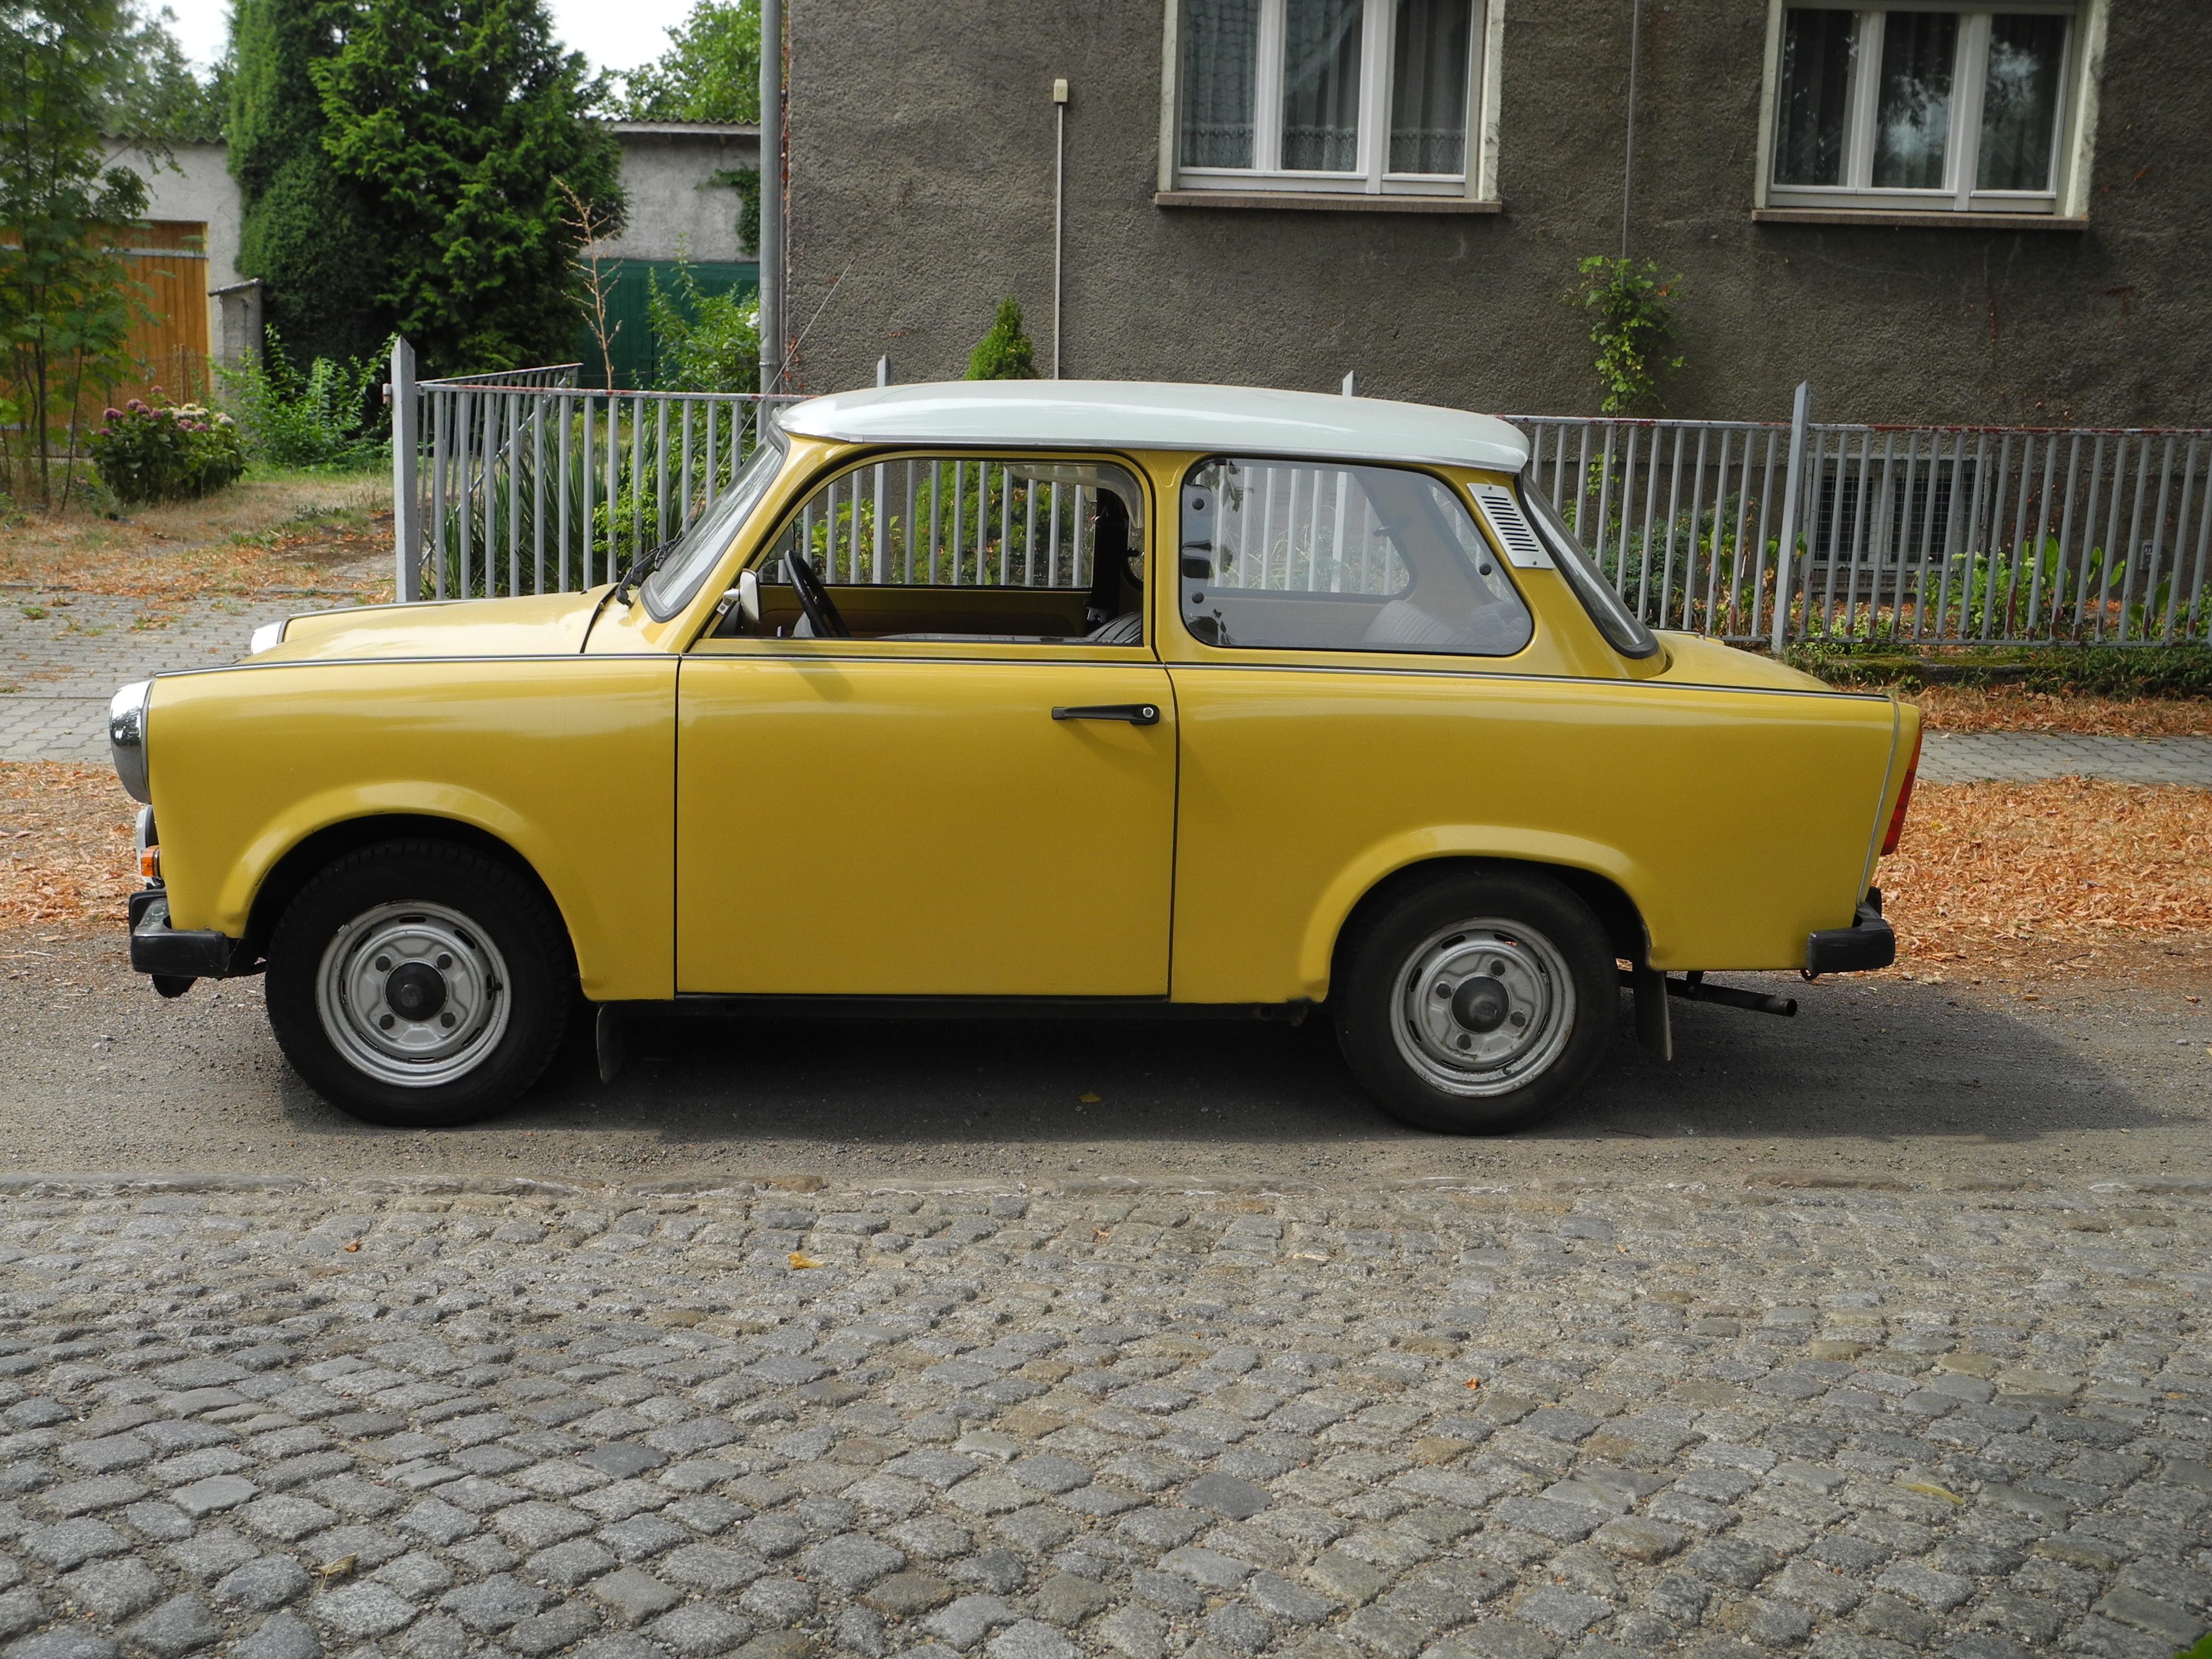 https://upload.wikimedia.org/wikipedia/commons/3/3e/Trabant_601_S_de_Luxe_from_1986_original_condition_IV.jpg